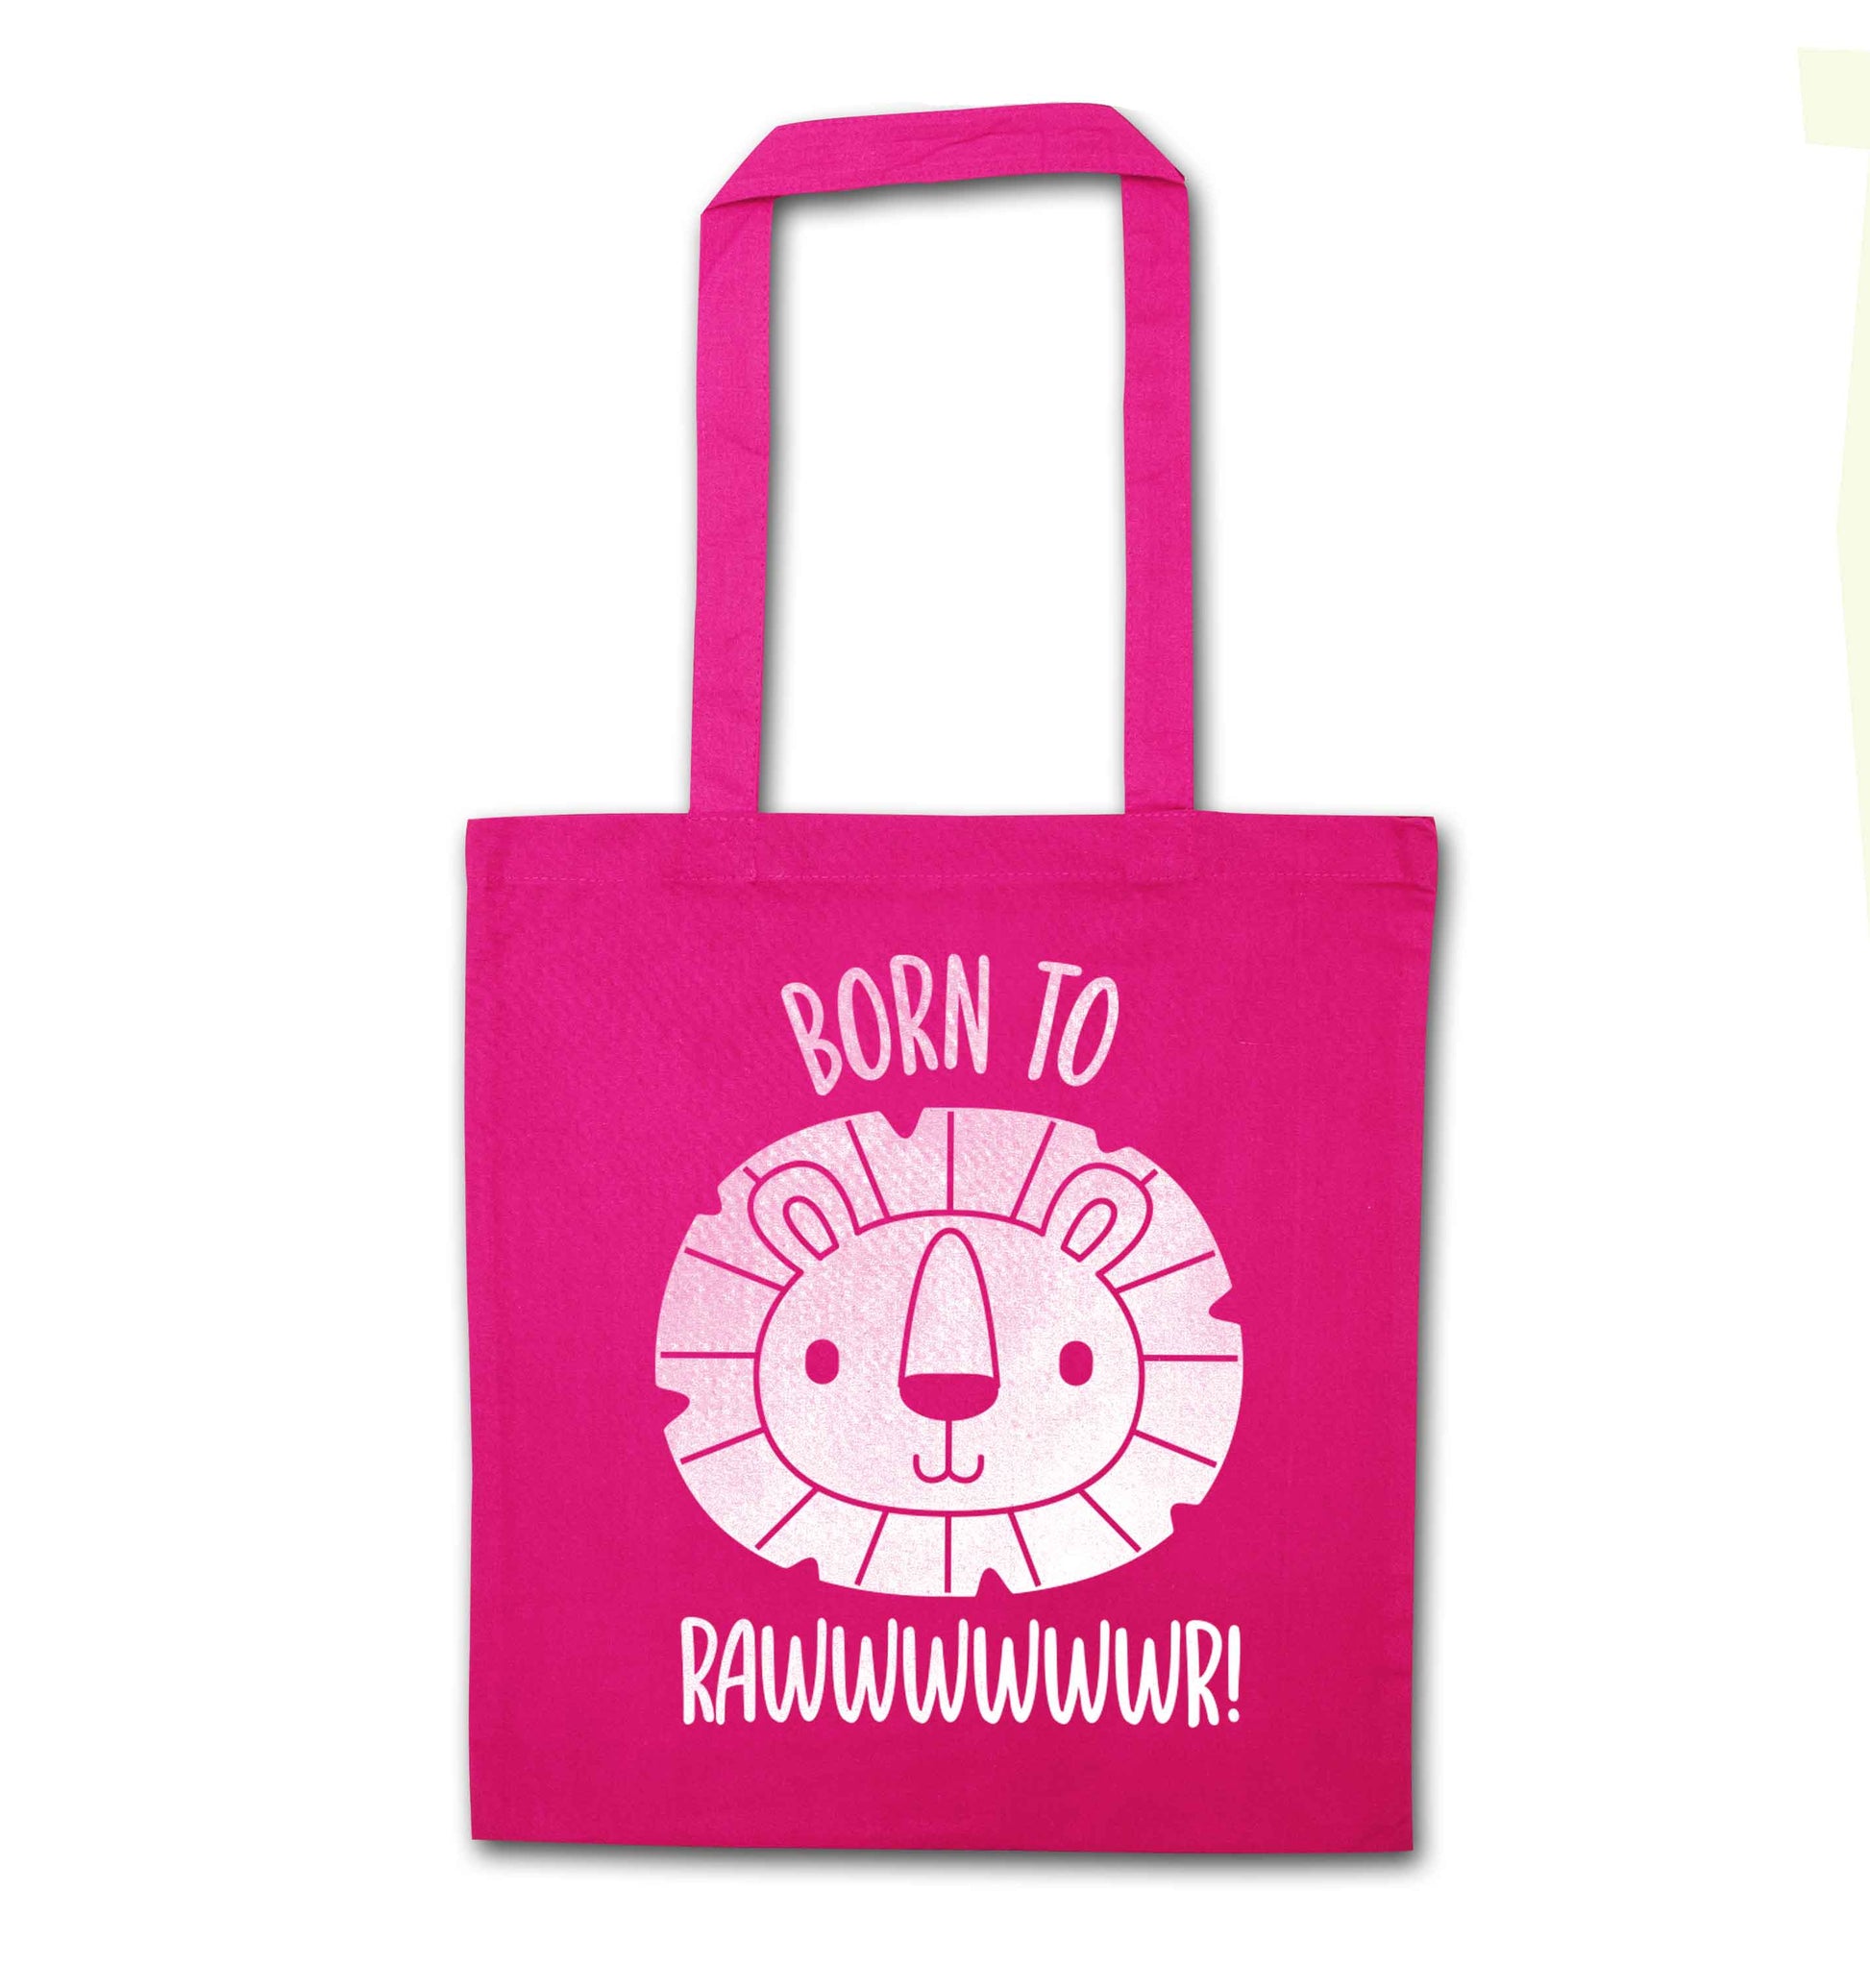 Born to rawr pink tote bag